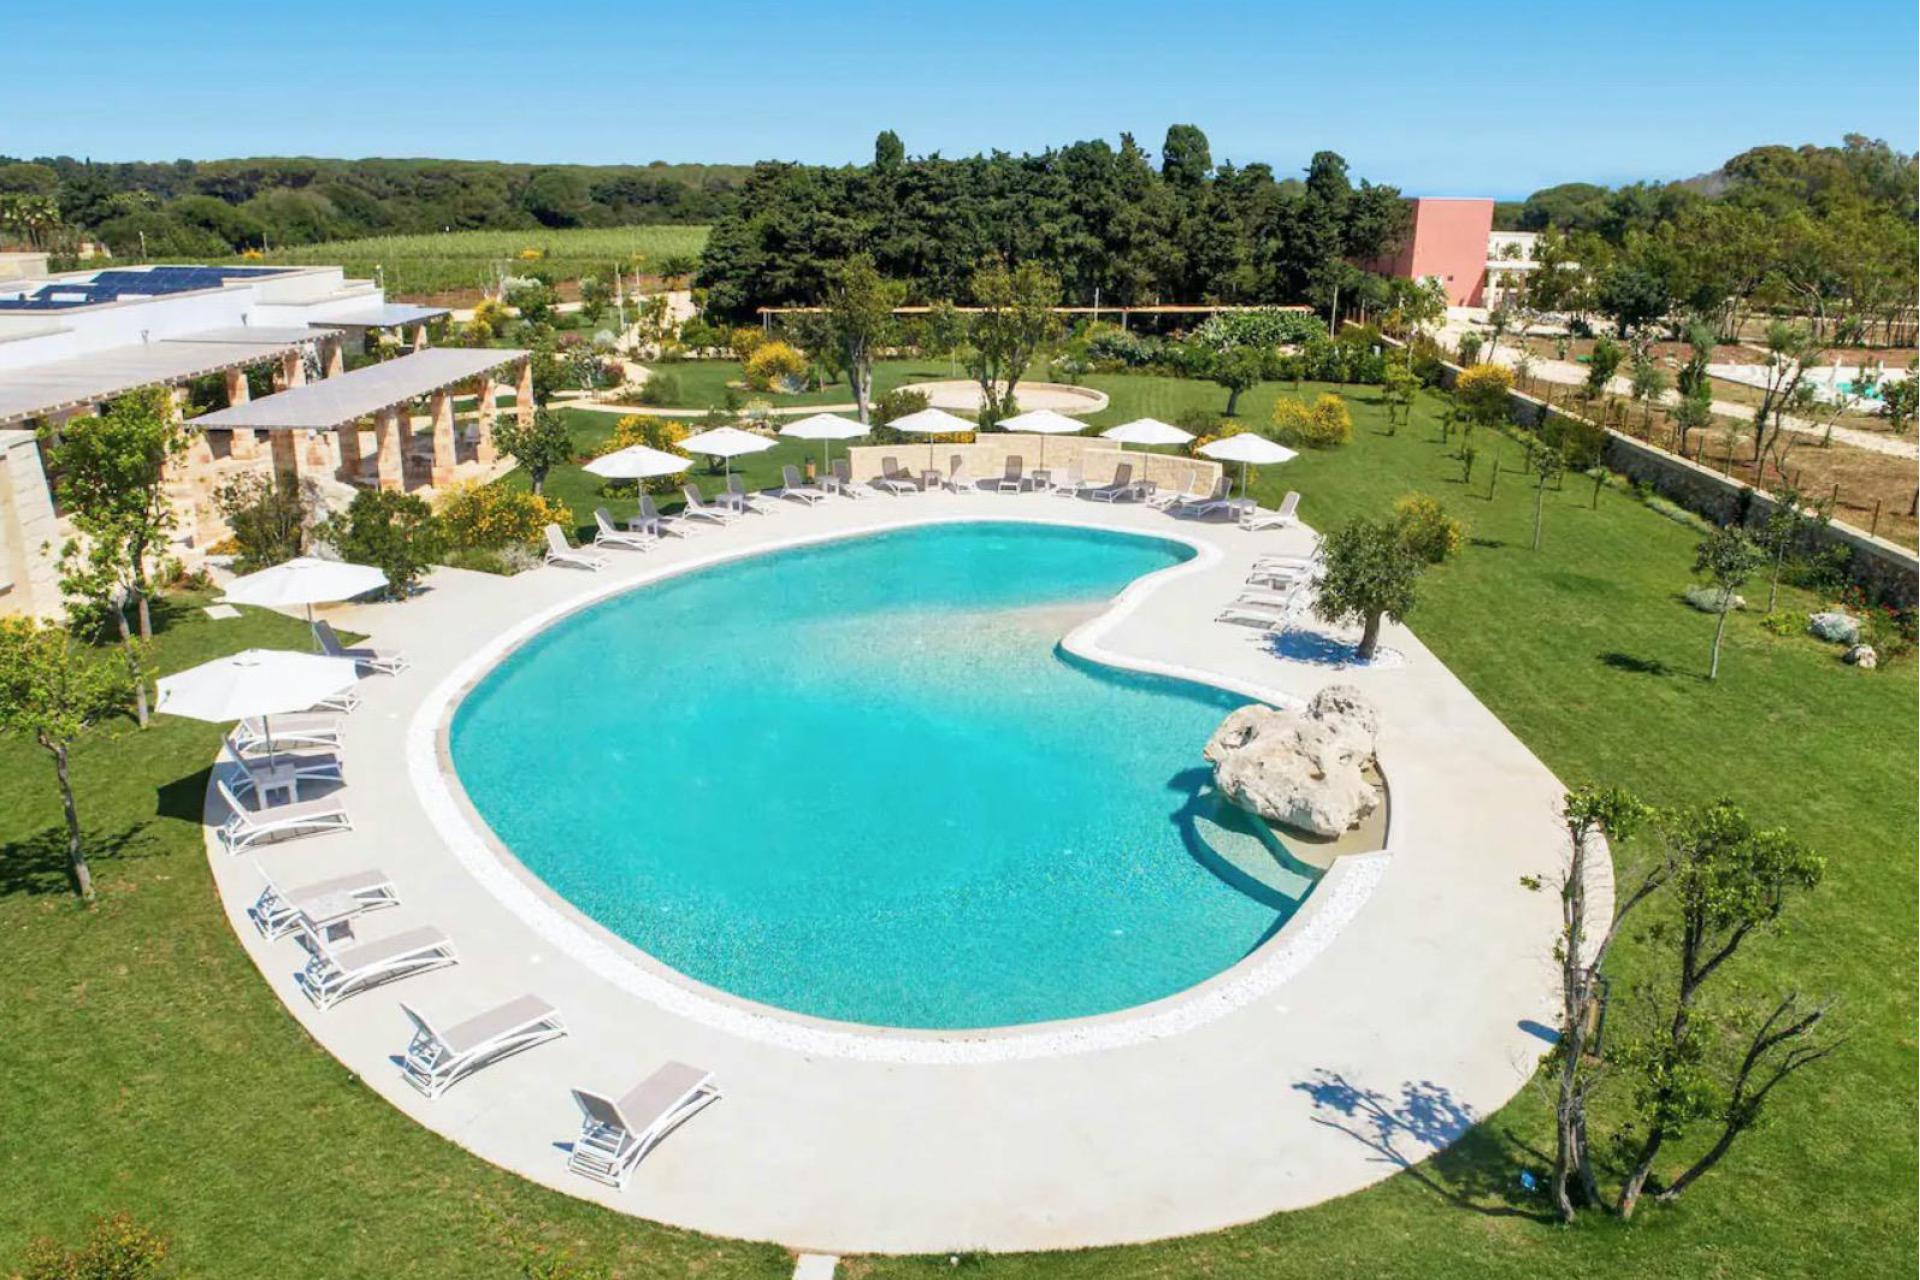 Agriturismo with beautiful large round pool